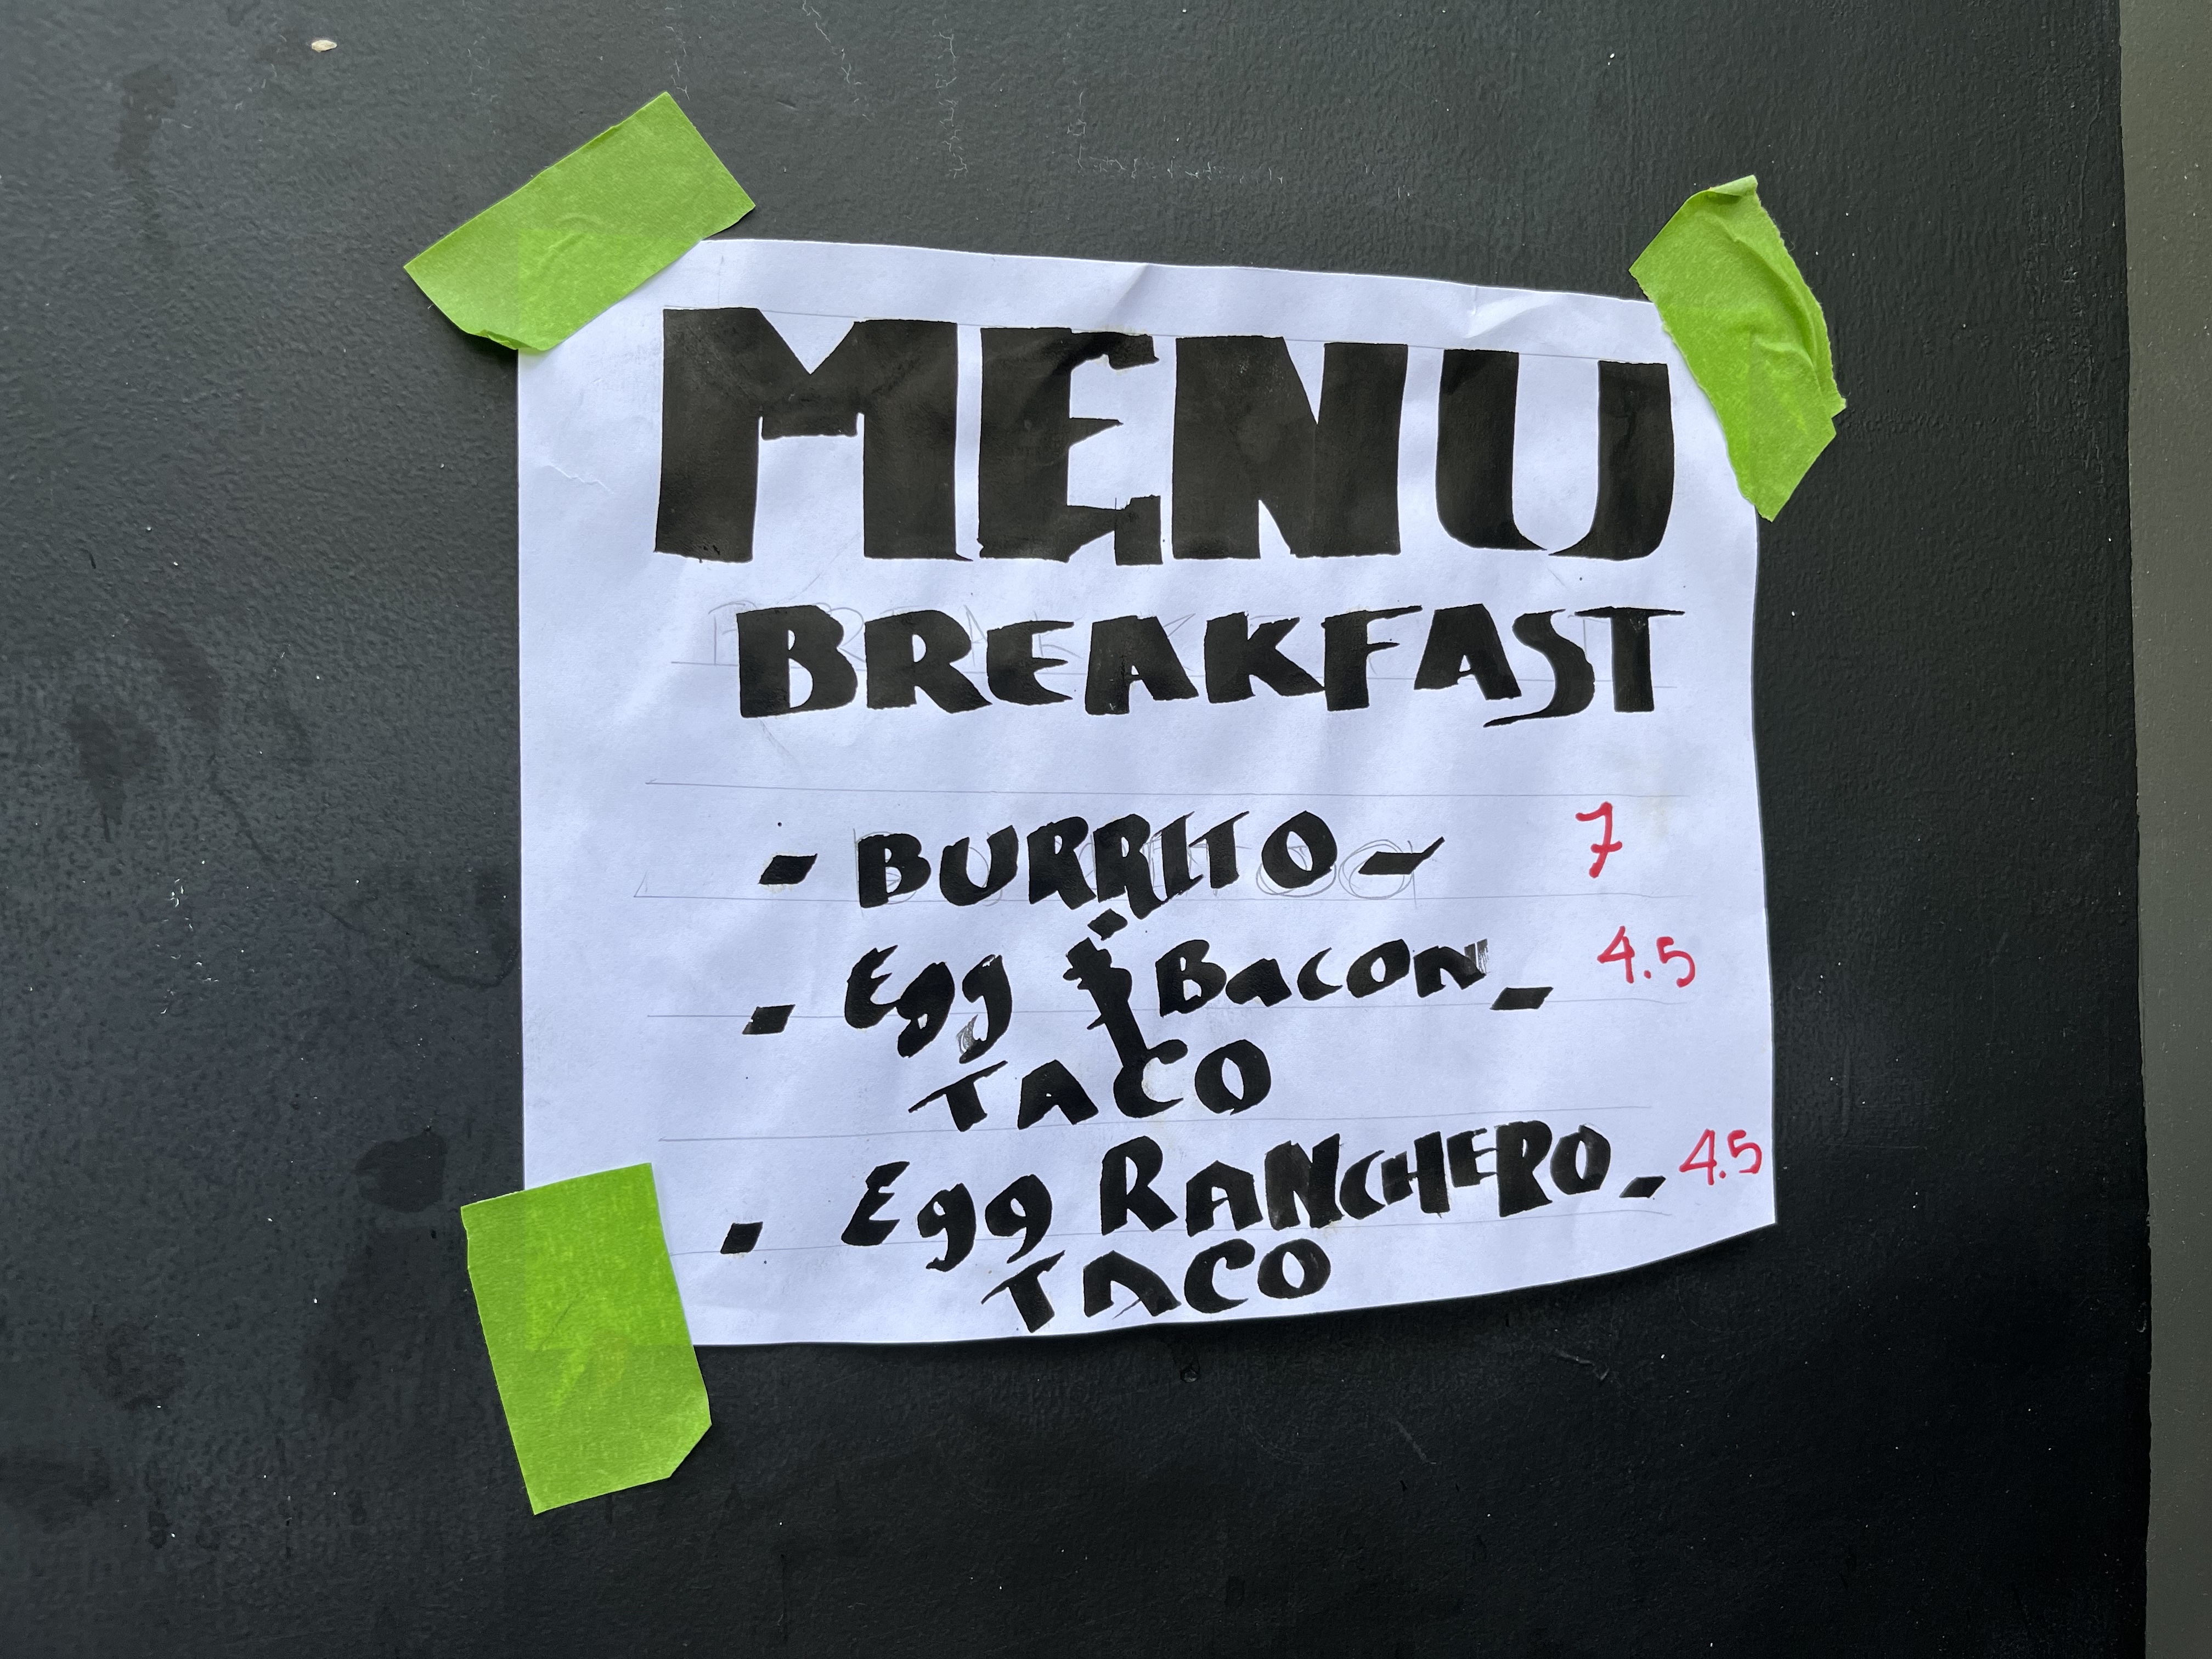 A white sheet of paper taped to a wall with green tape. It has the word MENU written in large capitals, followed by Breakfast, followed by Burrito; Egg bacon taco; and egg ranchero taco.